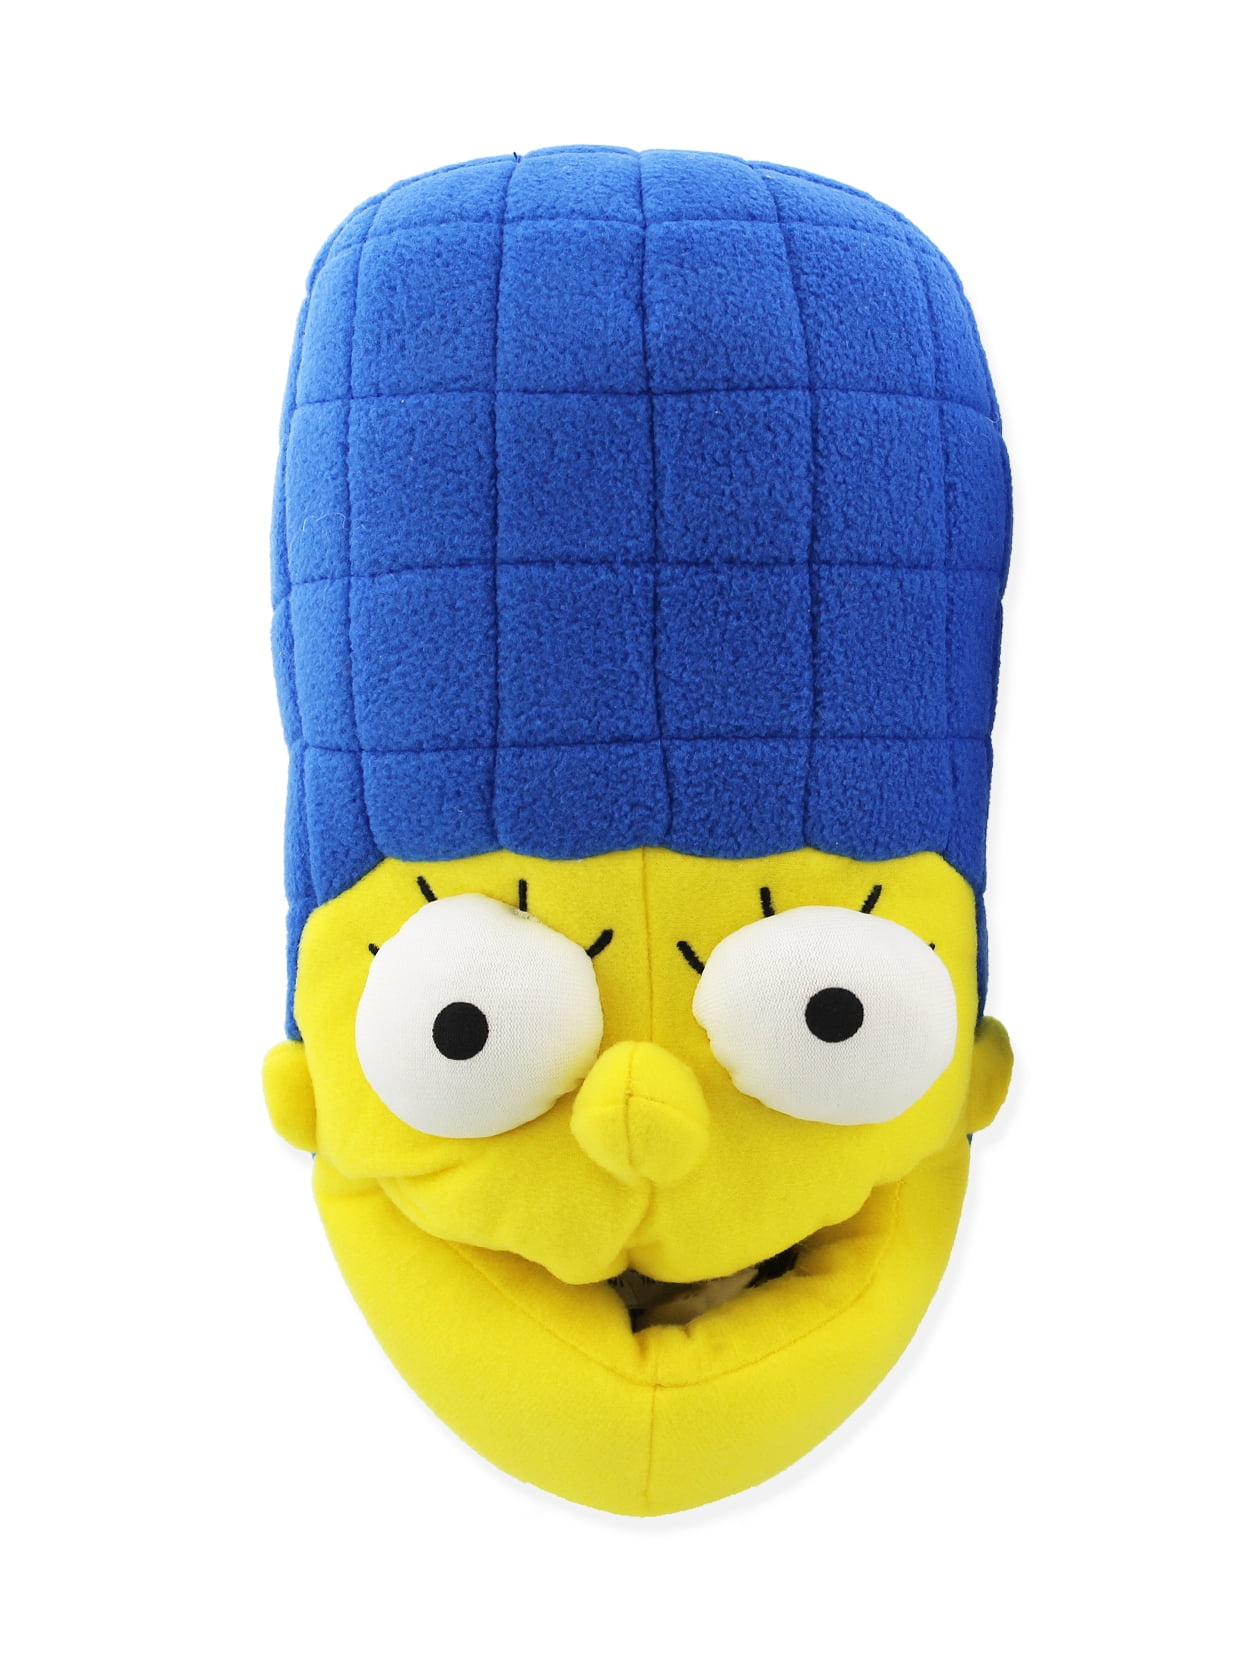 Marge Simpson Simpsons Novelty Plastic Credit Card 